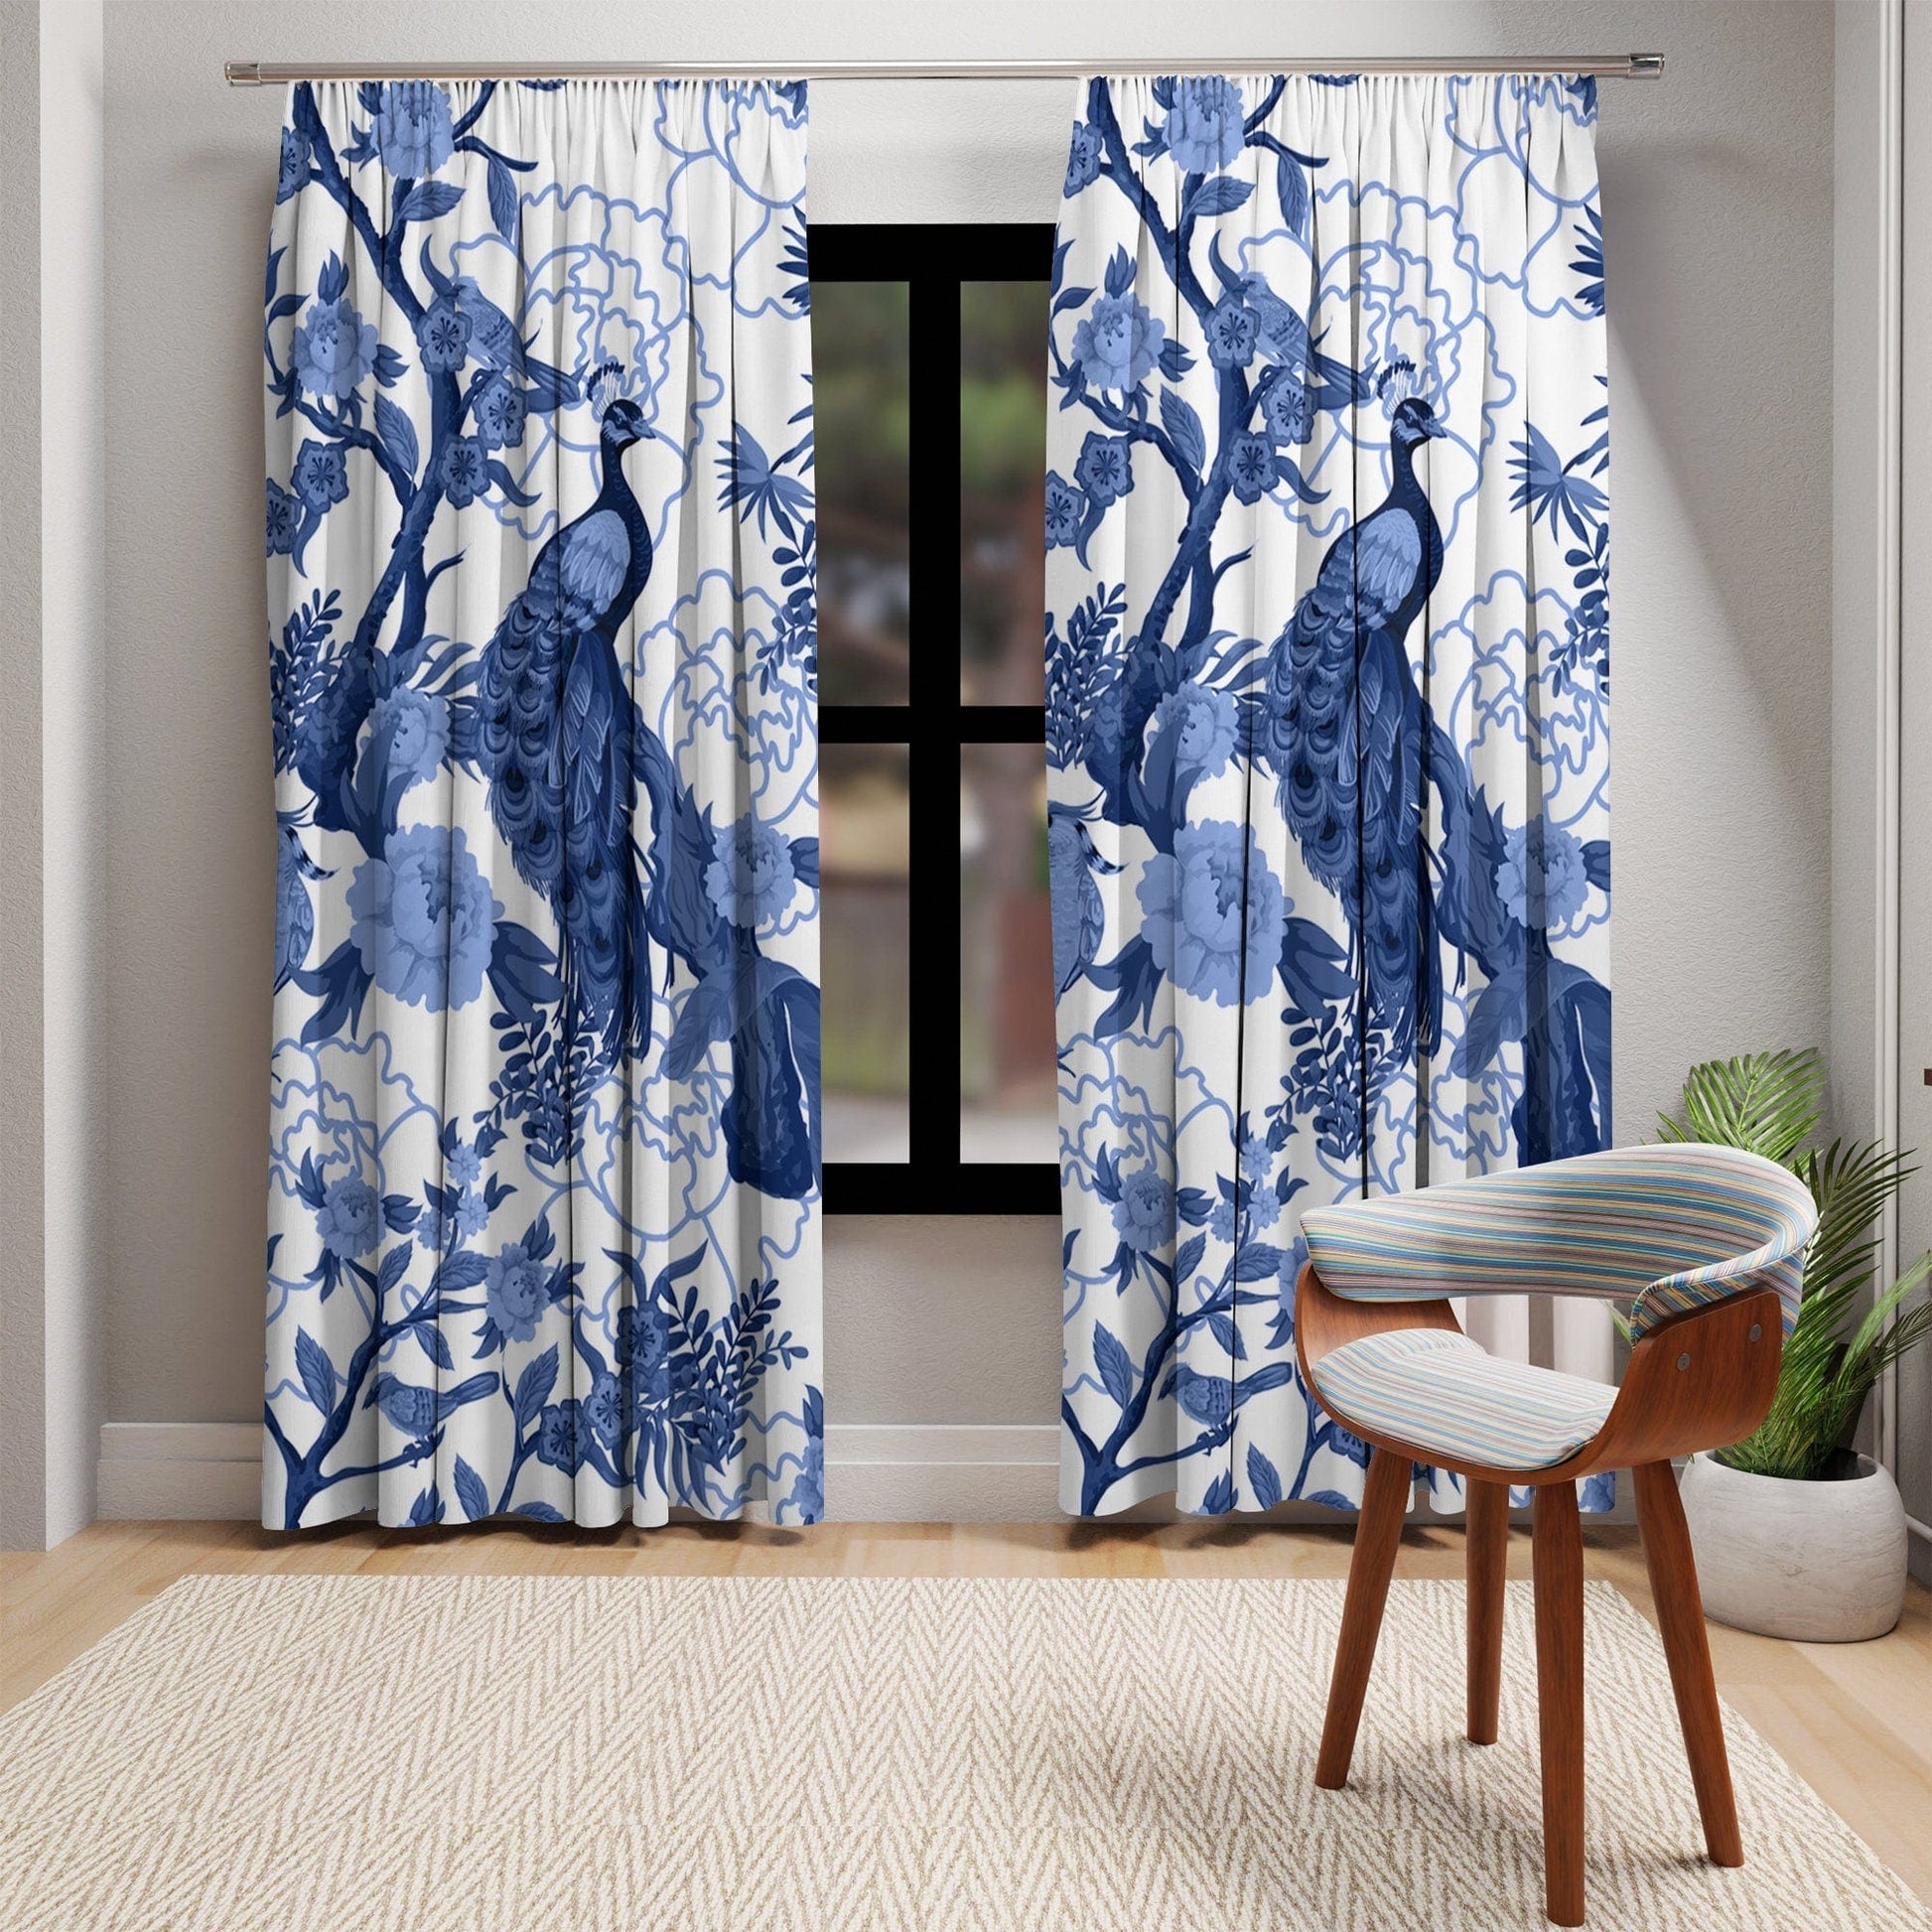 Kate McEnroe New York Elegant Chinoiserie Floral Peacock Window Curtains, Blue and White Botanical Toile Panels with Peacocks and Jungle Motifs Window Curtains